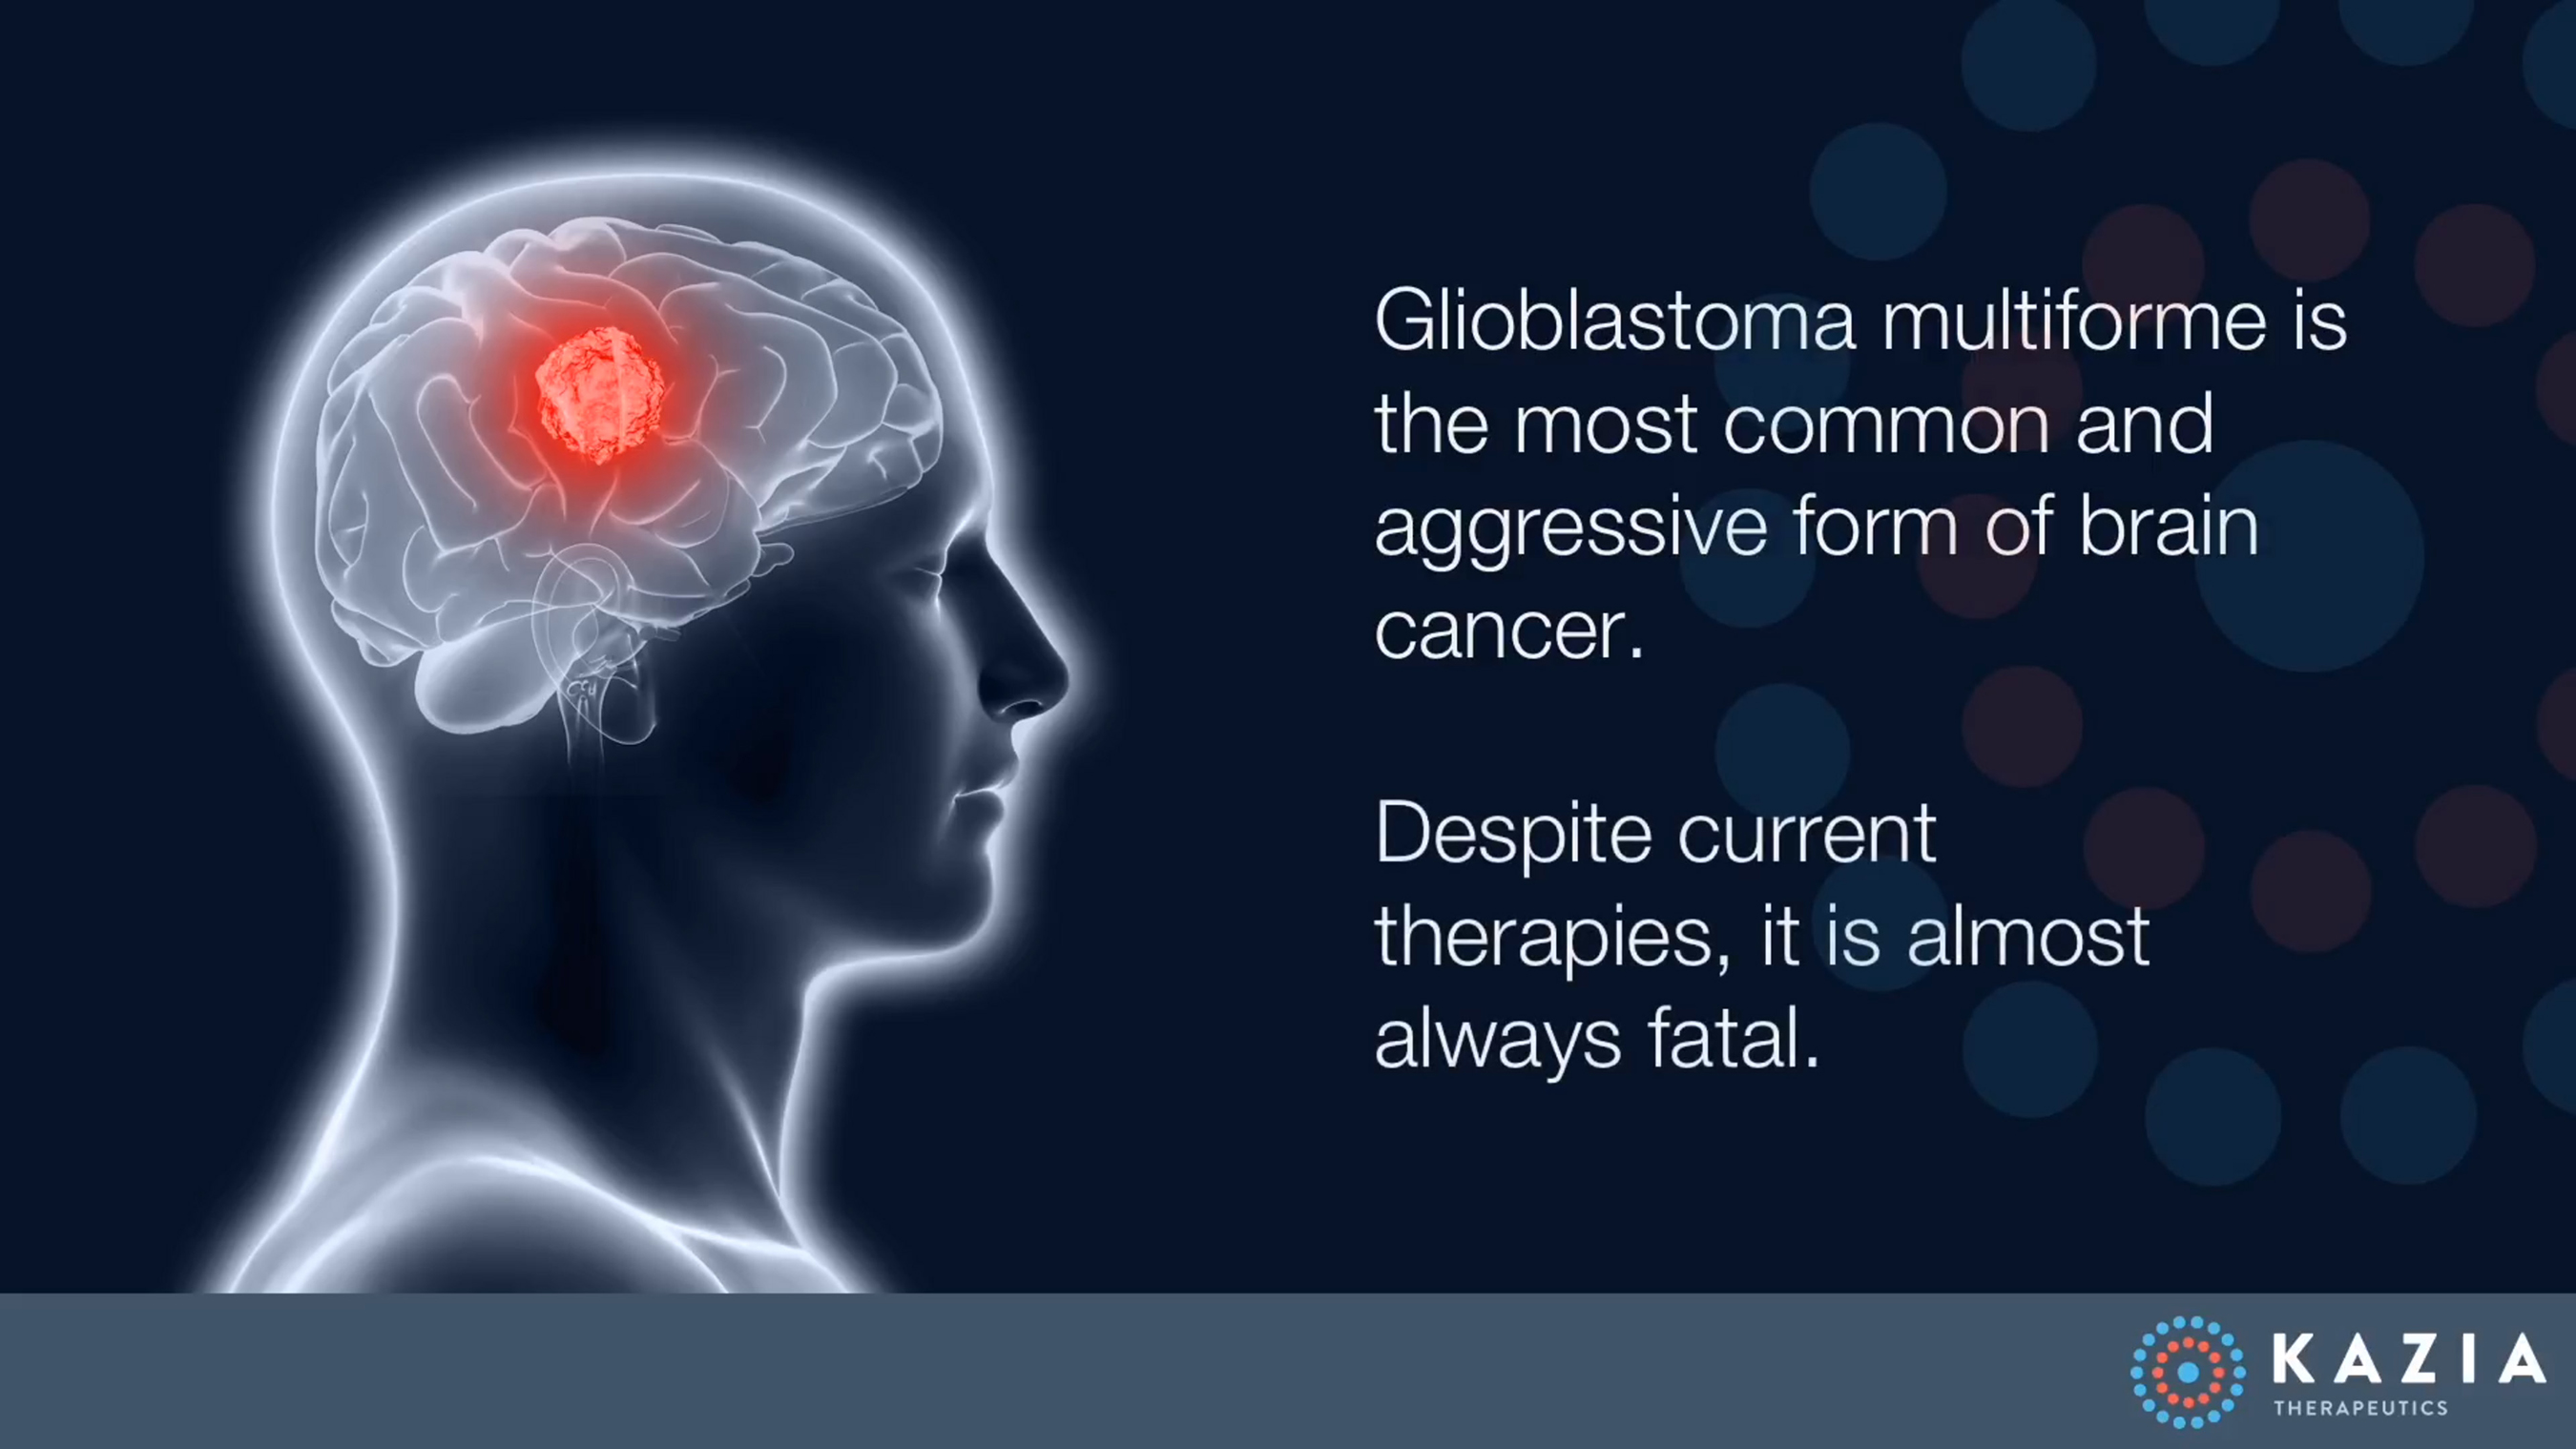 Despite current therapies, glioblastoma is almost always fatal